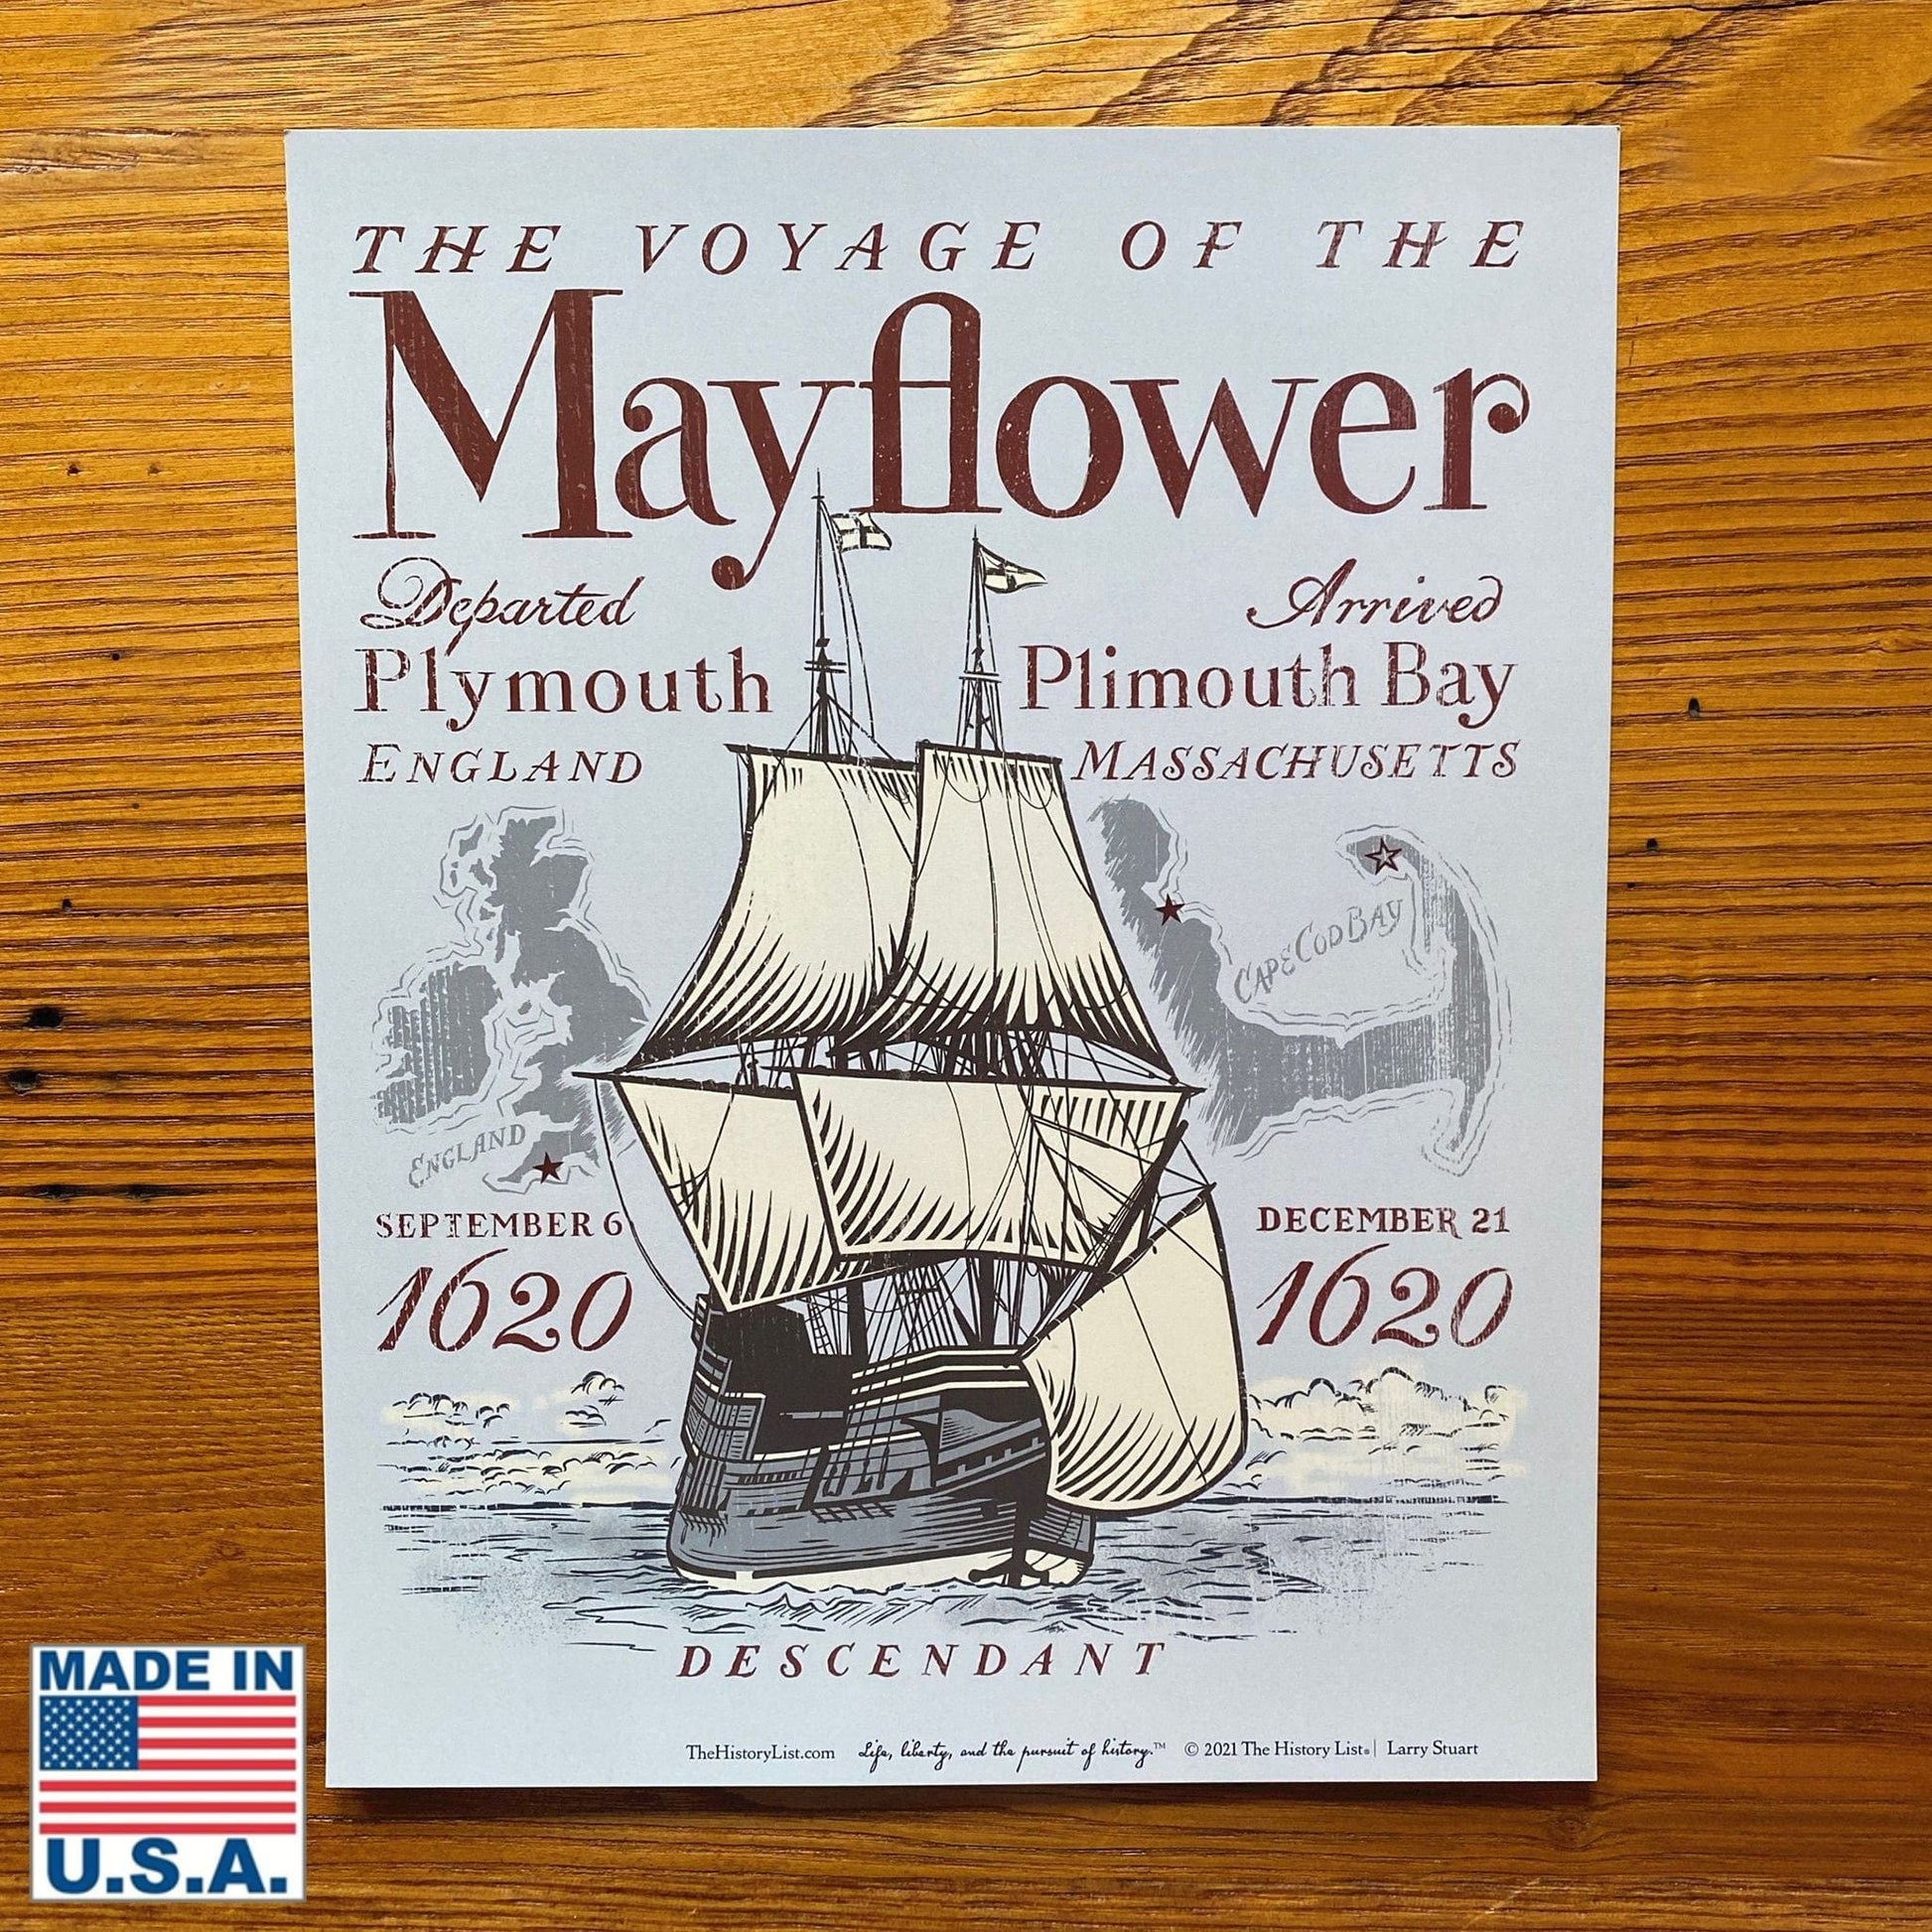 "The Voyage of the Mayflower" Sticker from the History List Store